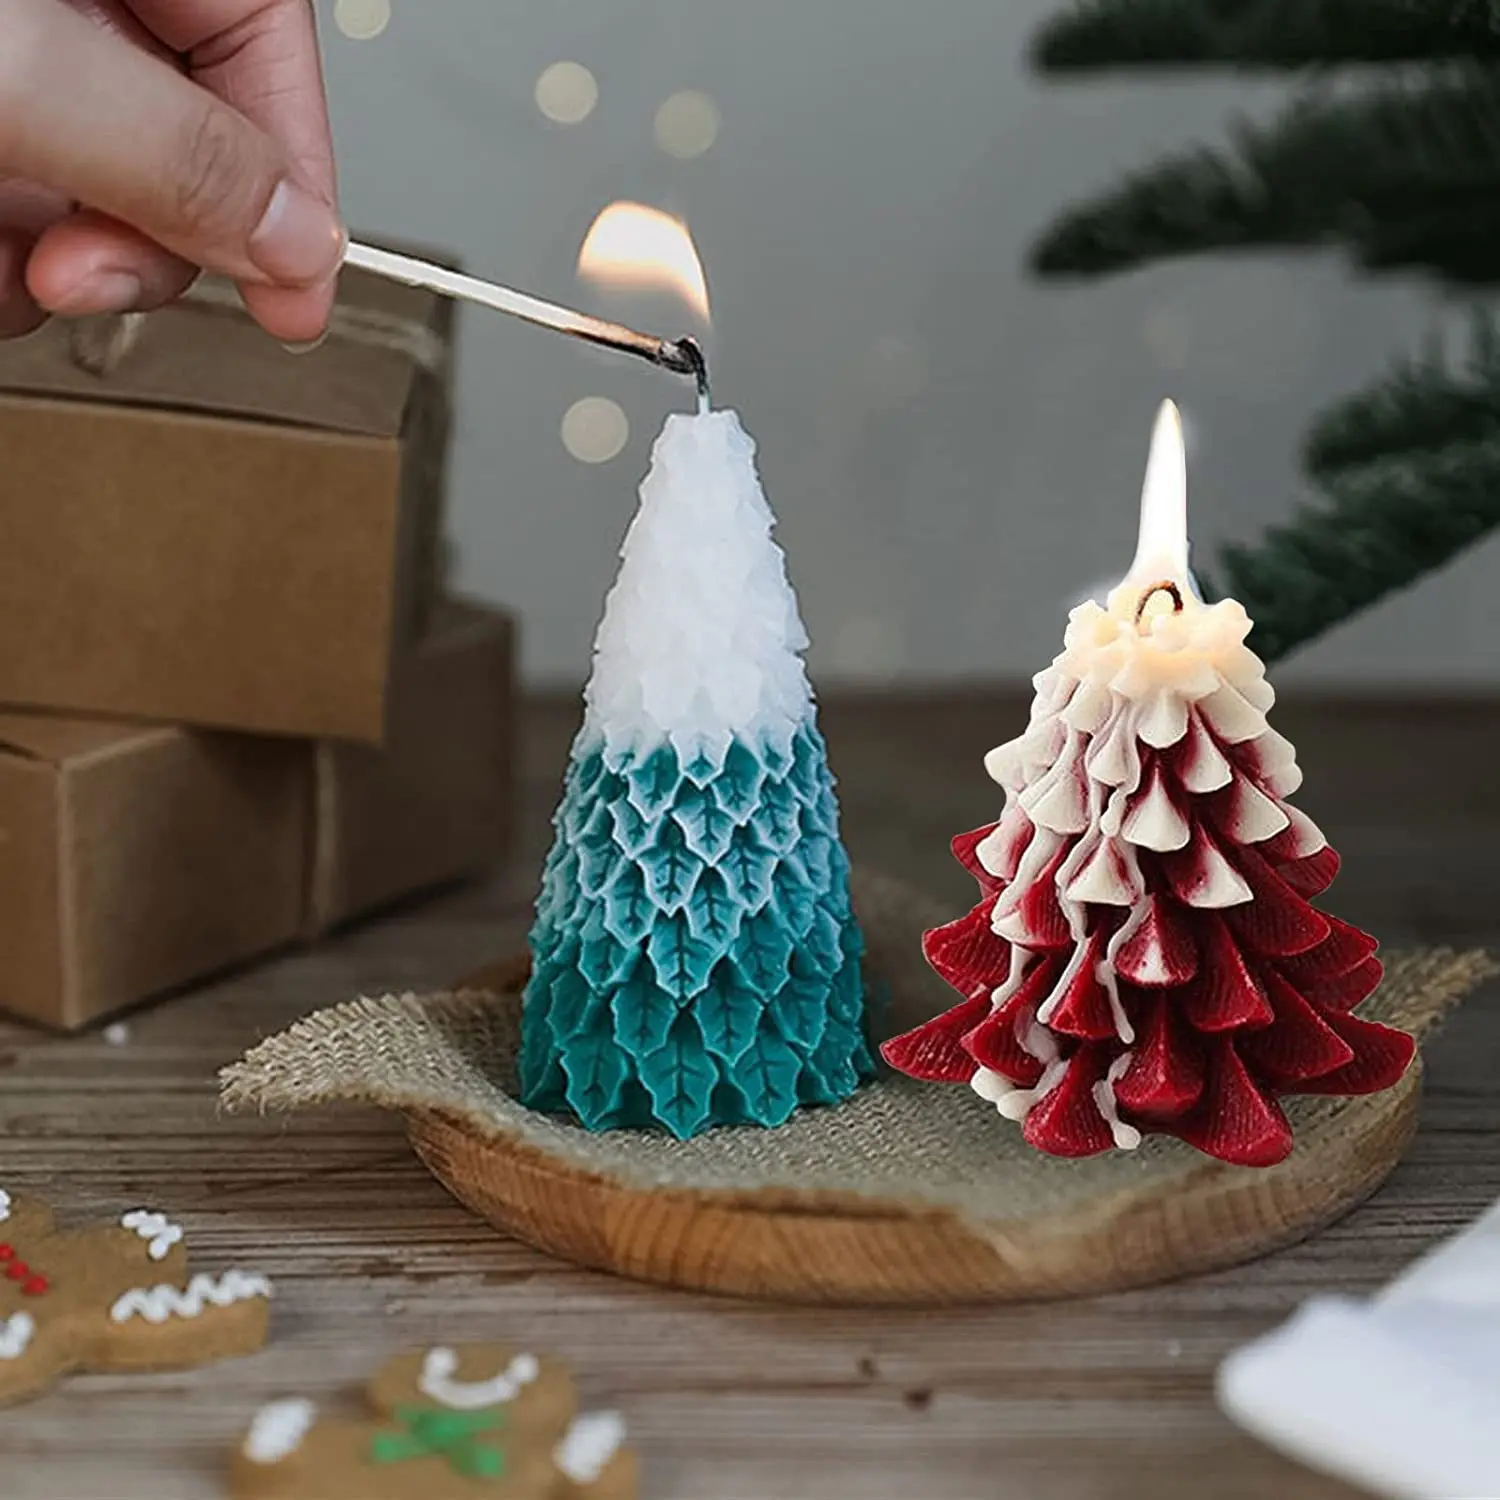 Large 3D Christmas Tree Candle Silicone Mold DIY Aromatherapy Gypsum Soap Resin Ice Baking Pine Mold Home Decor Festival Gifts